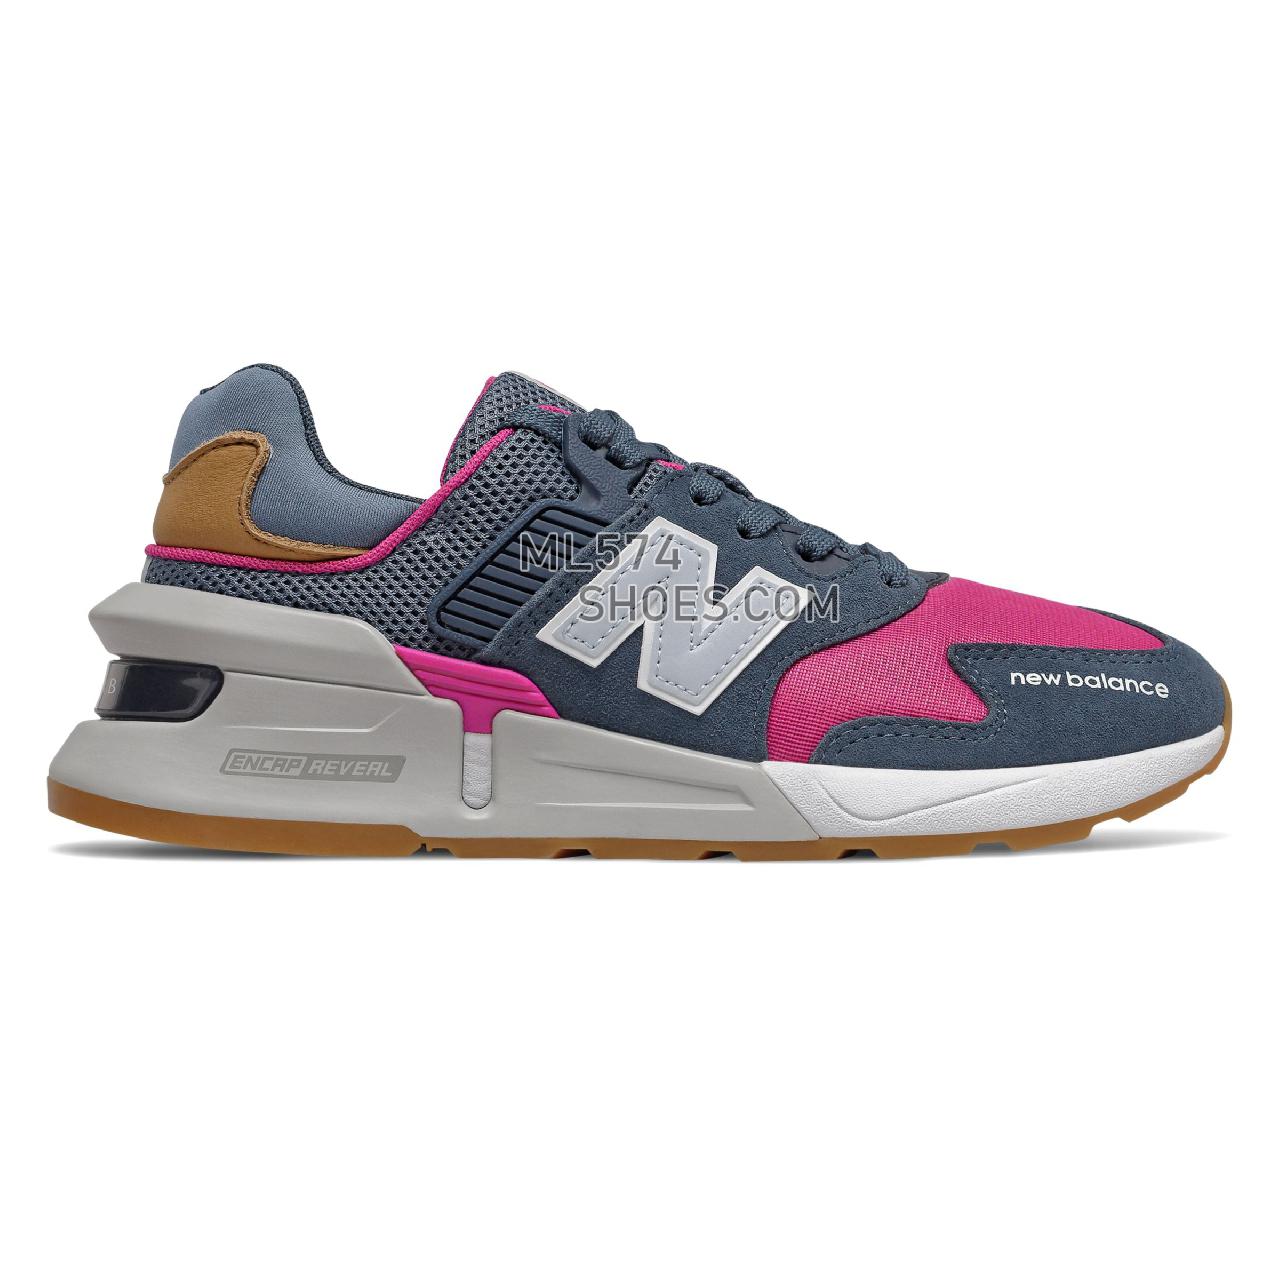 New Balance 997 Sport - Women's Sport Style Sneakers - Stone Blue with Exuberant Pink - WS997JGA